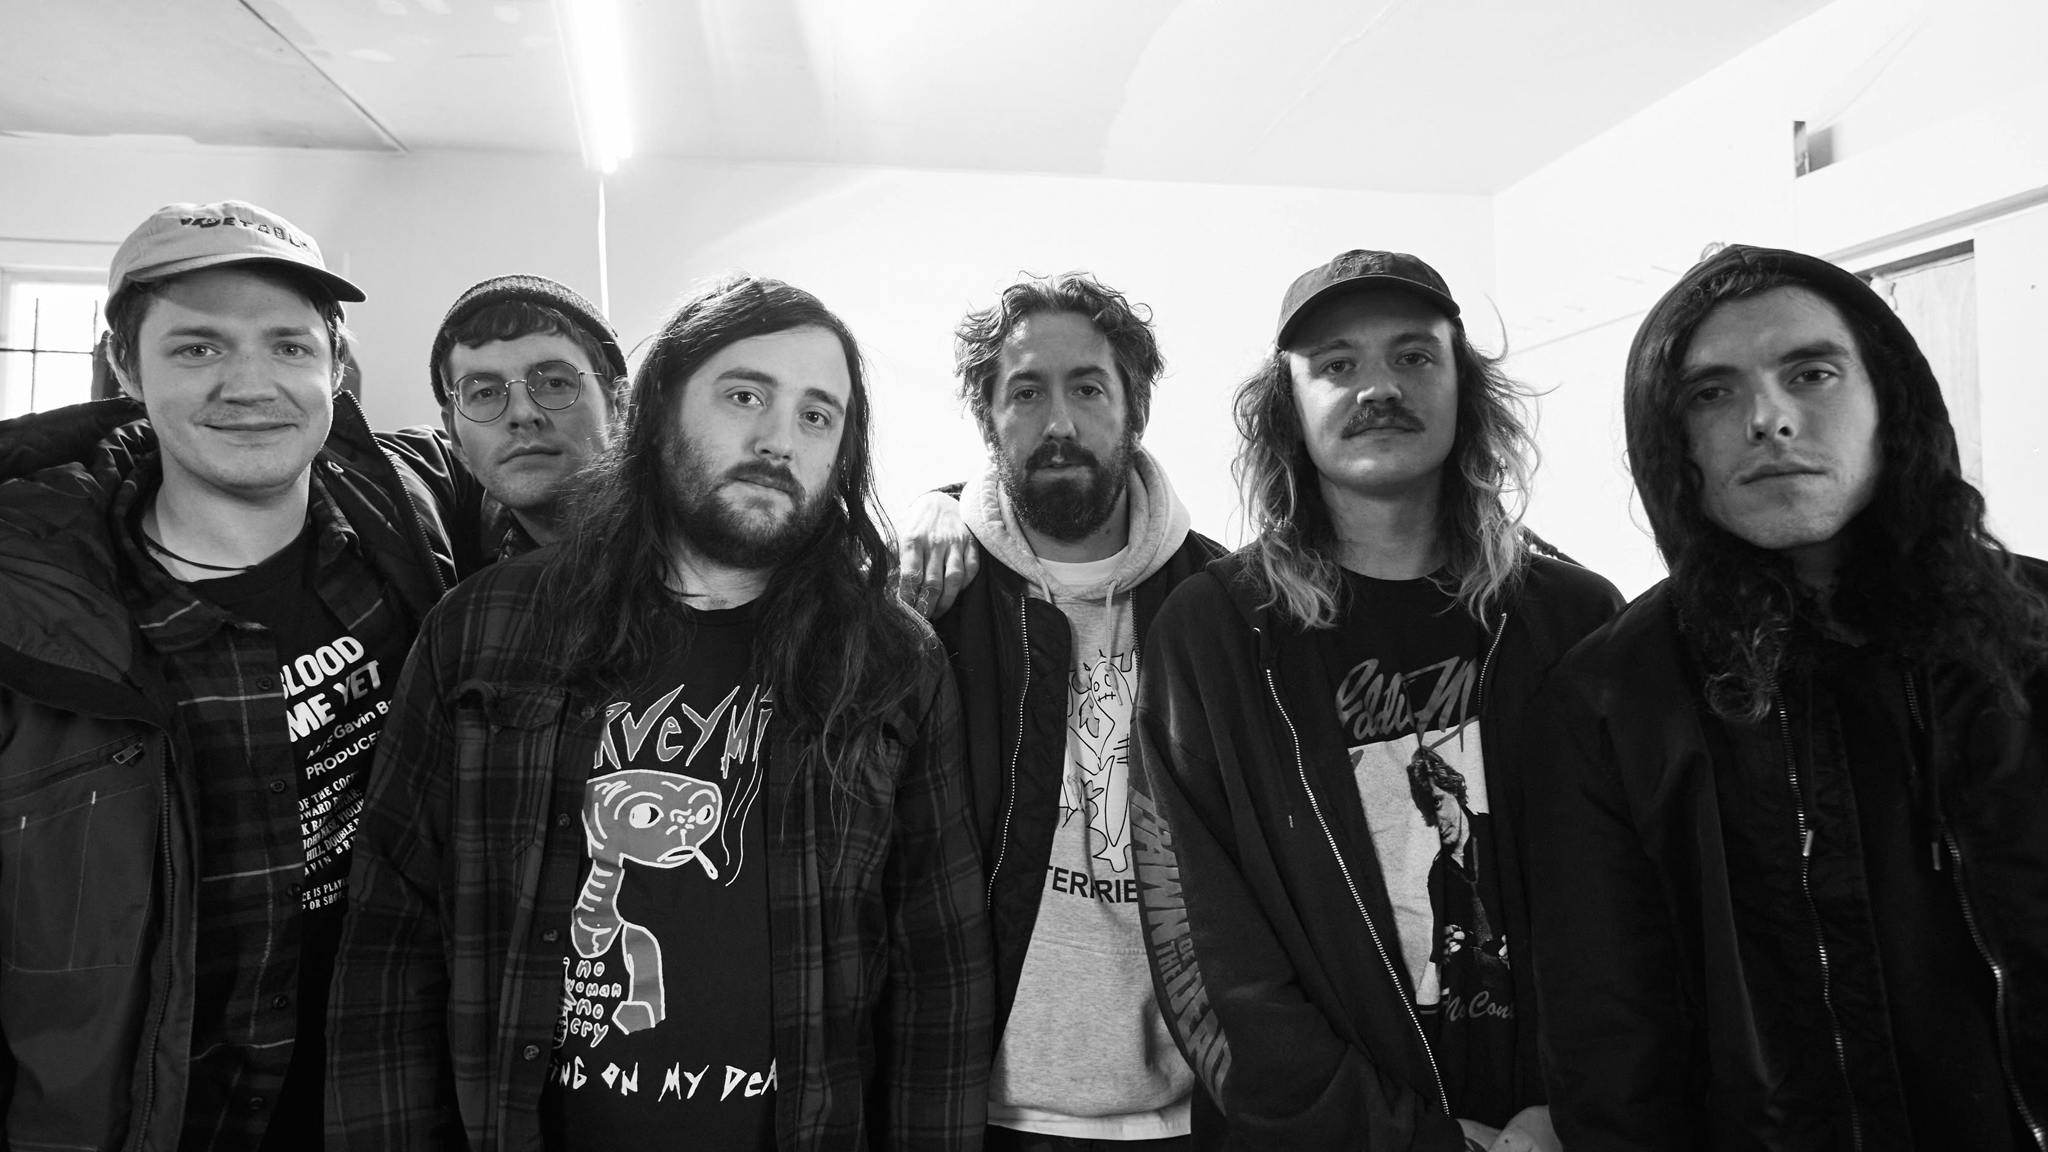 Full Of Hell and NOTHING have announced a collaborative album